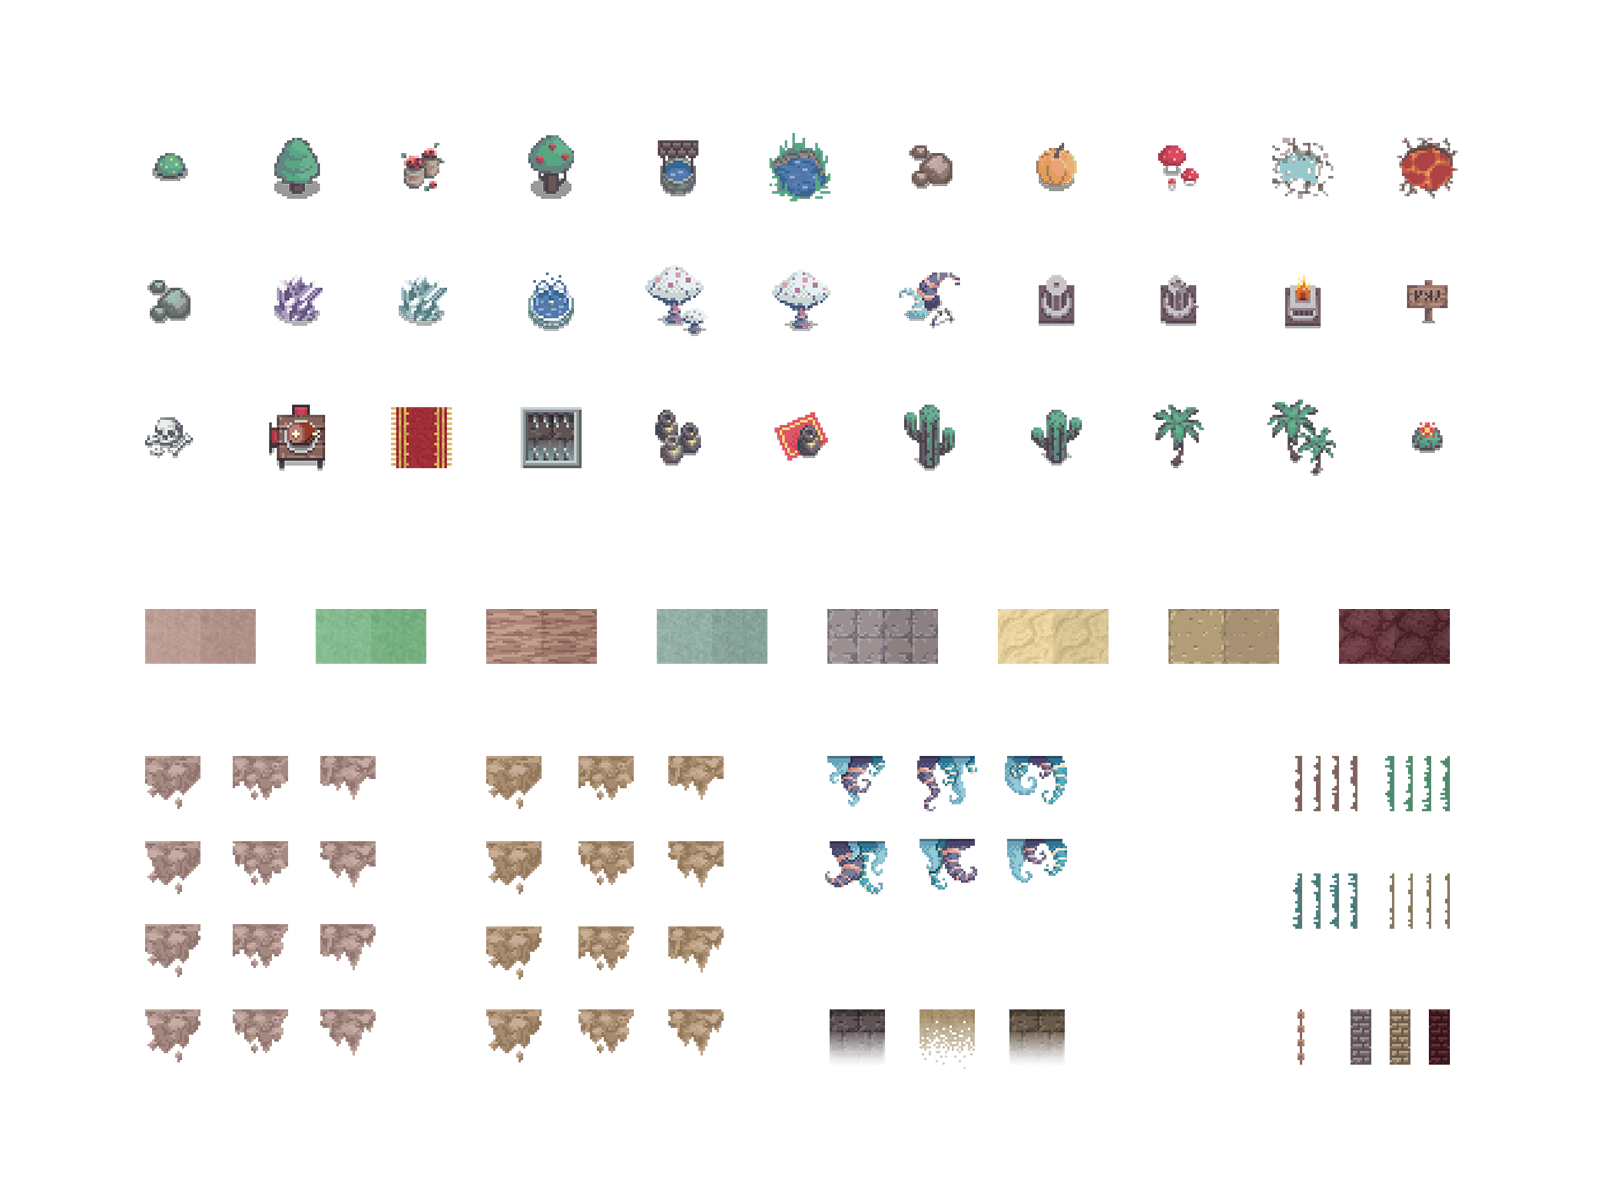 Objects and tiles for pixel art game Dice Heroes by Sasha Kolesnik on